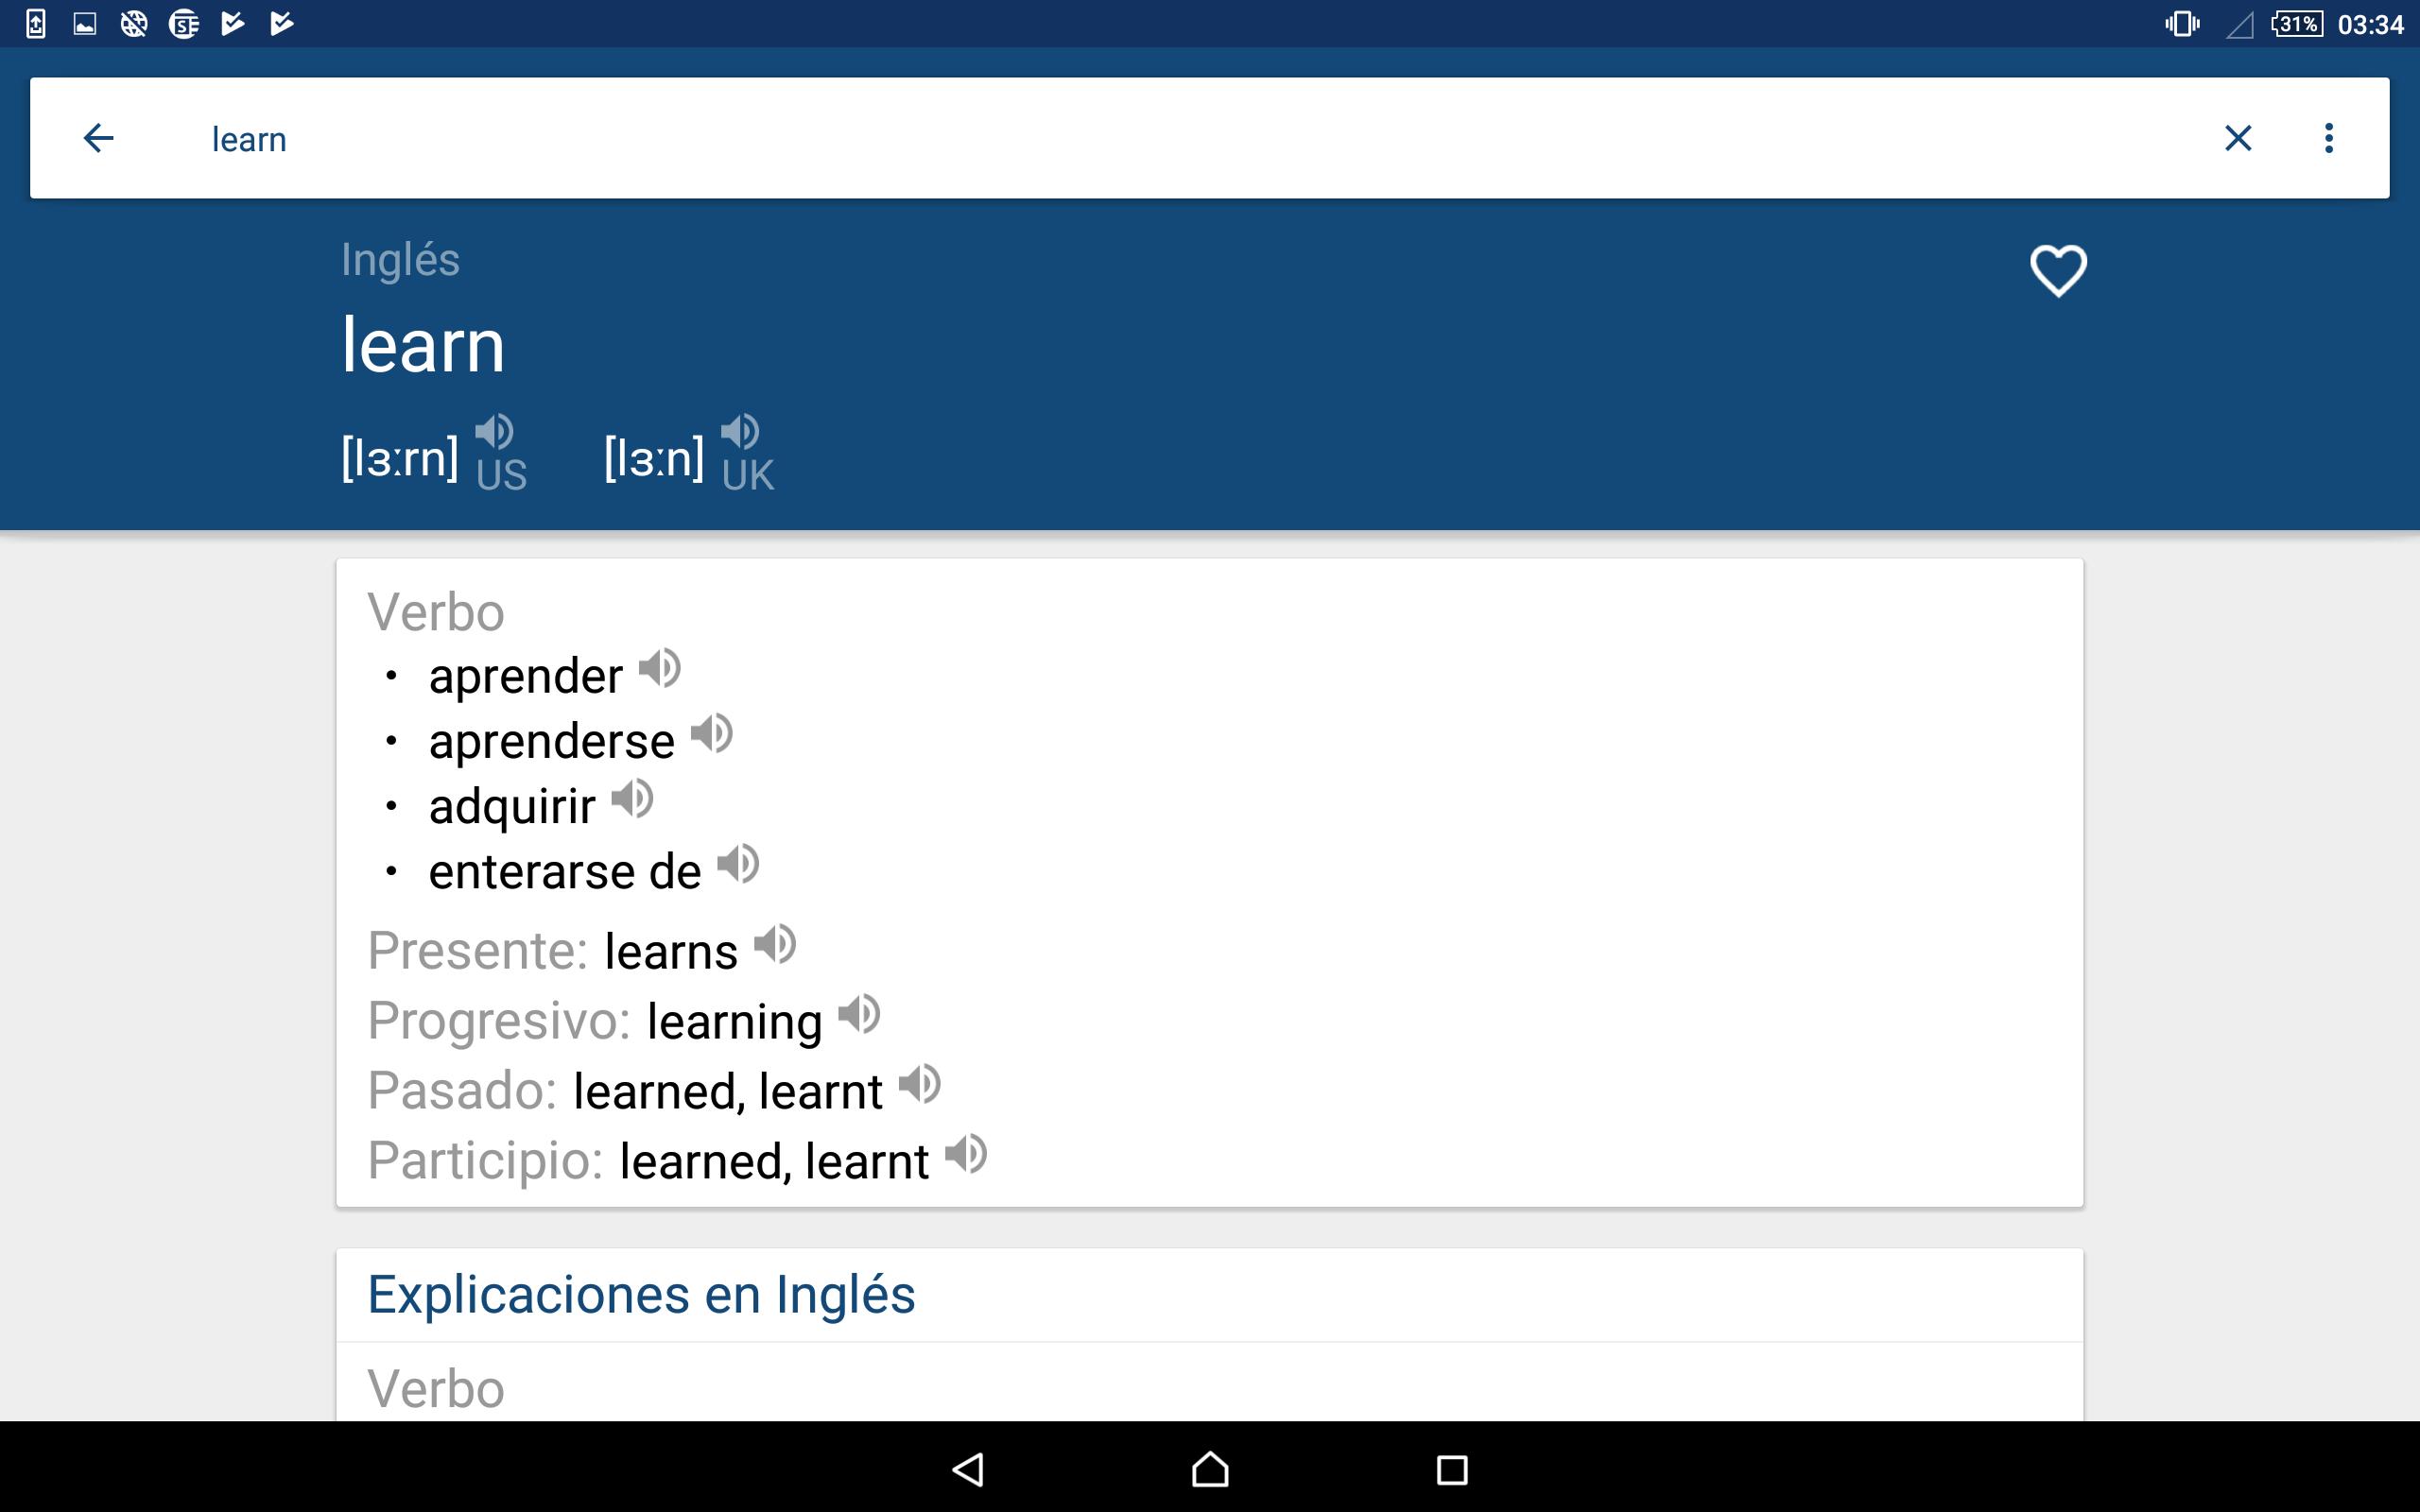 Traductor De Espanol A Ingles For Android APK Download